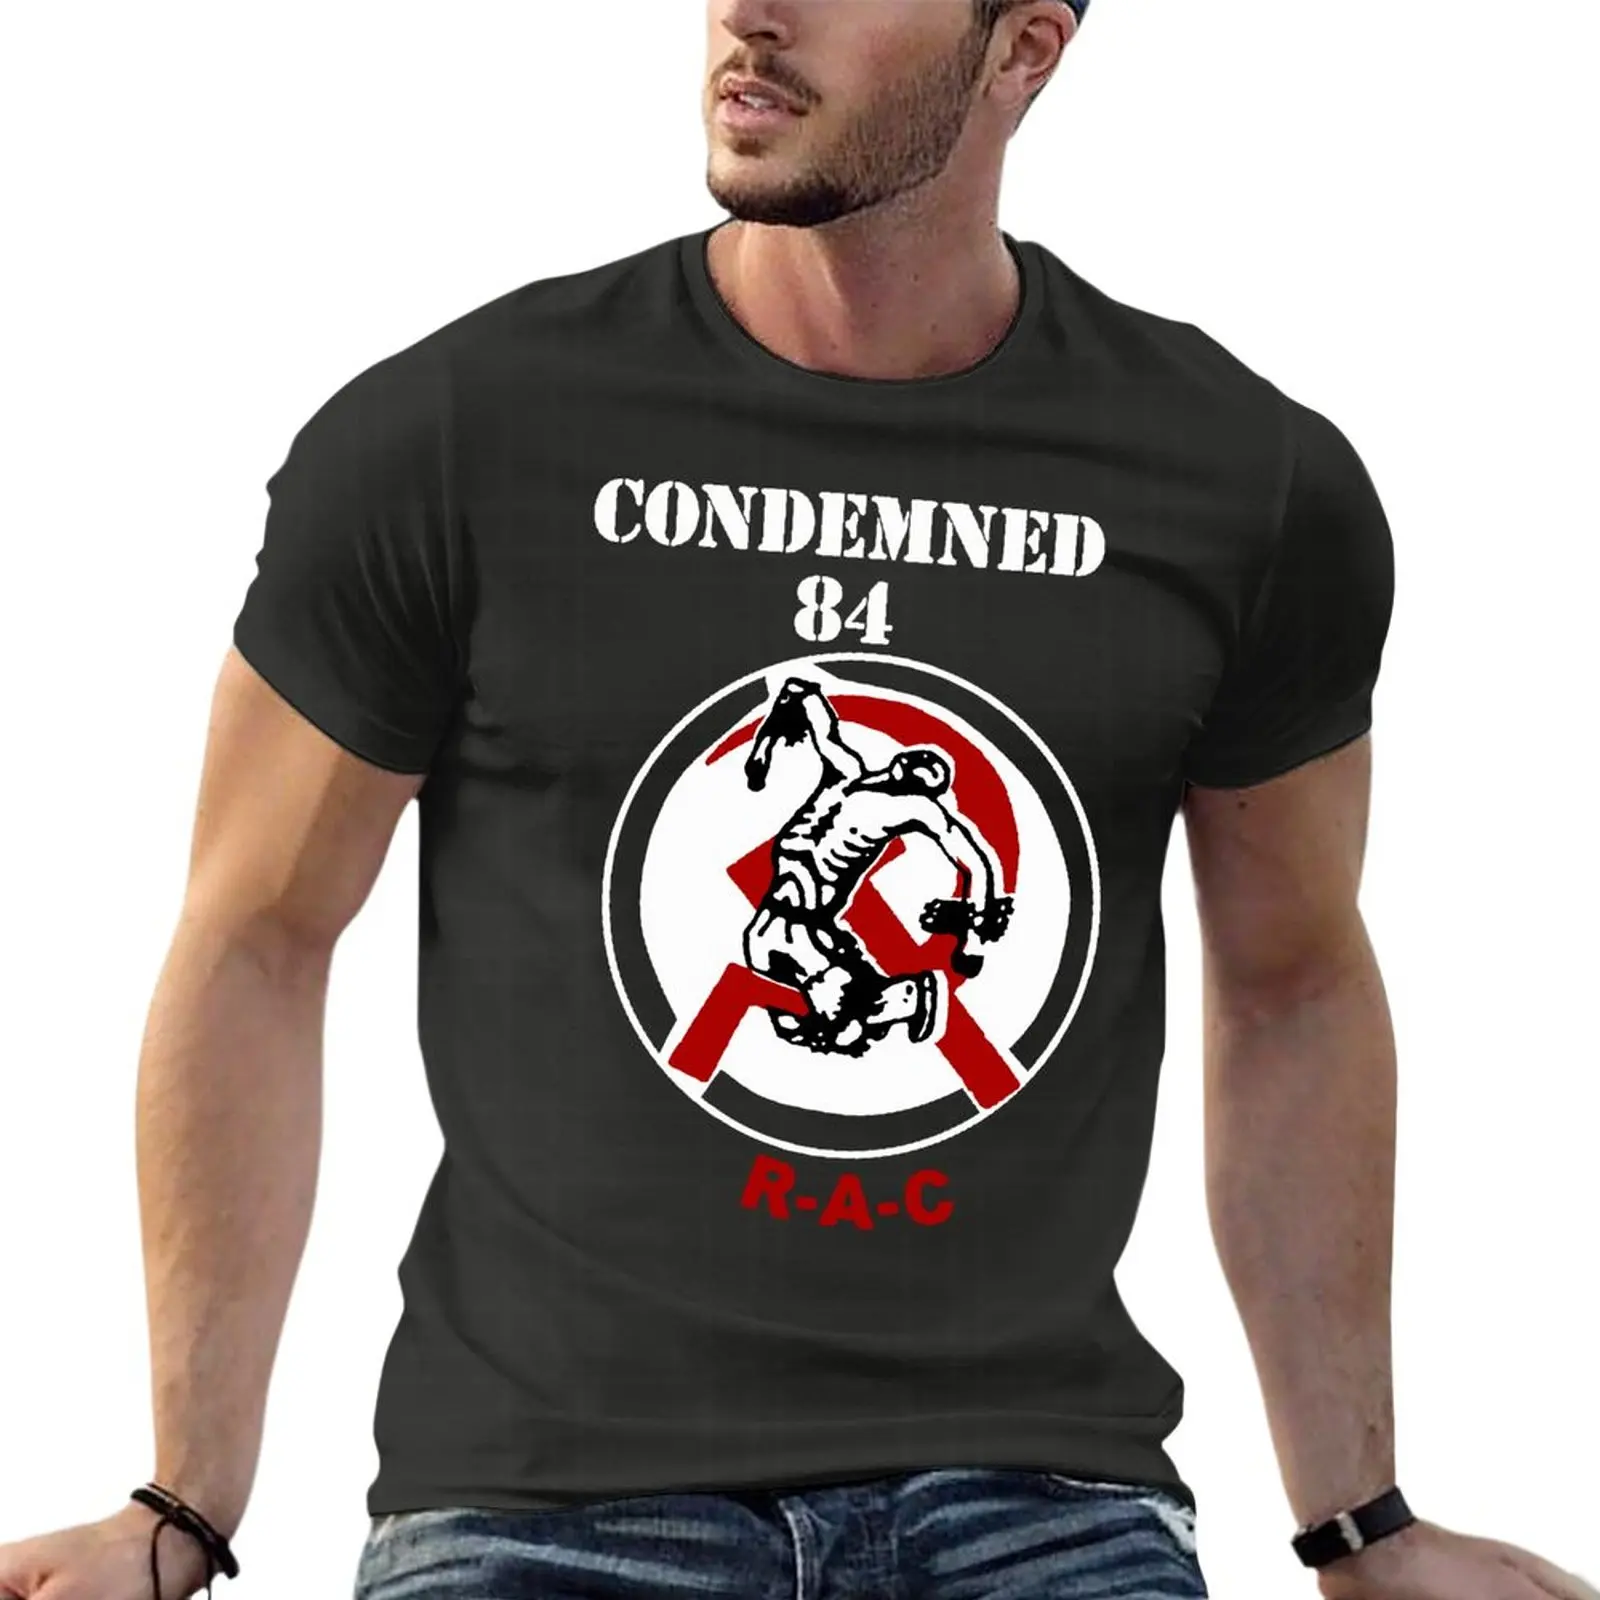 

84 Condemned Hard Rock Band Oversize Tshirt Brand Men Clothes 100% Cotton Streetwear Big Size Top Tee